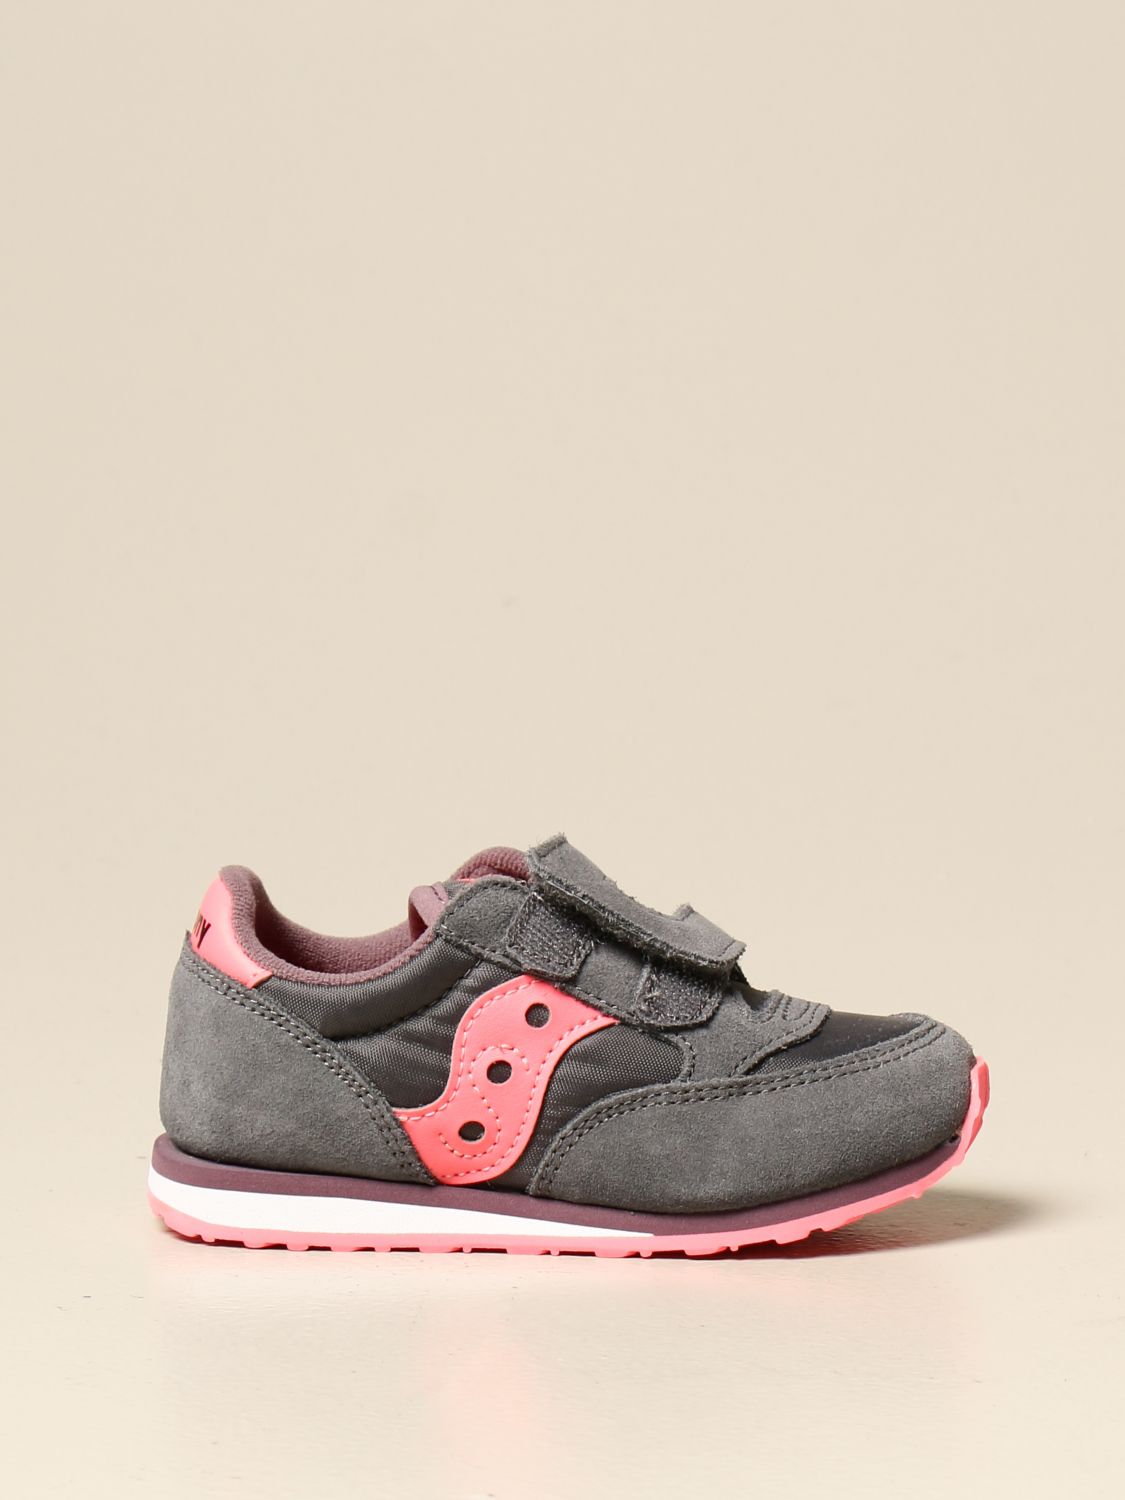 Saucony Outlet: Chaussures enfant | Chaussures Saucony Enfant Gris |  Chaussures Saucony SL163386 GIGLIO.COM